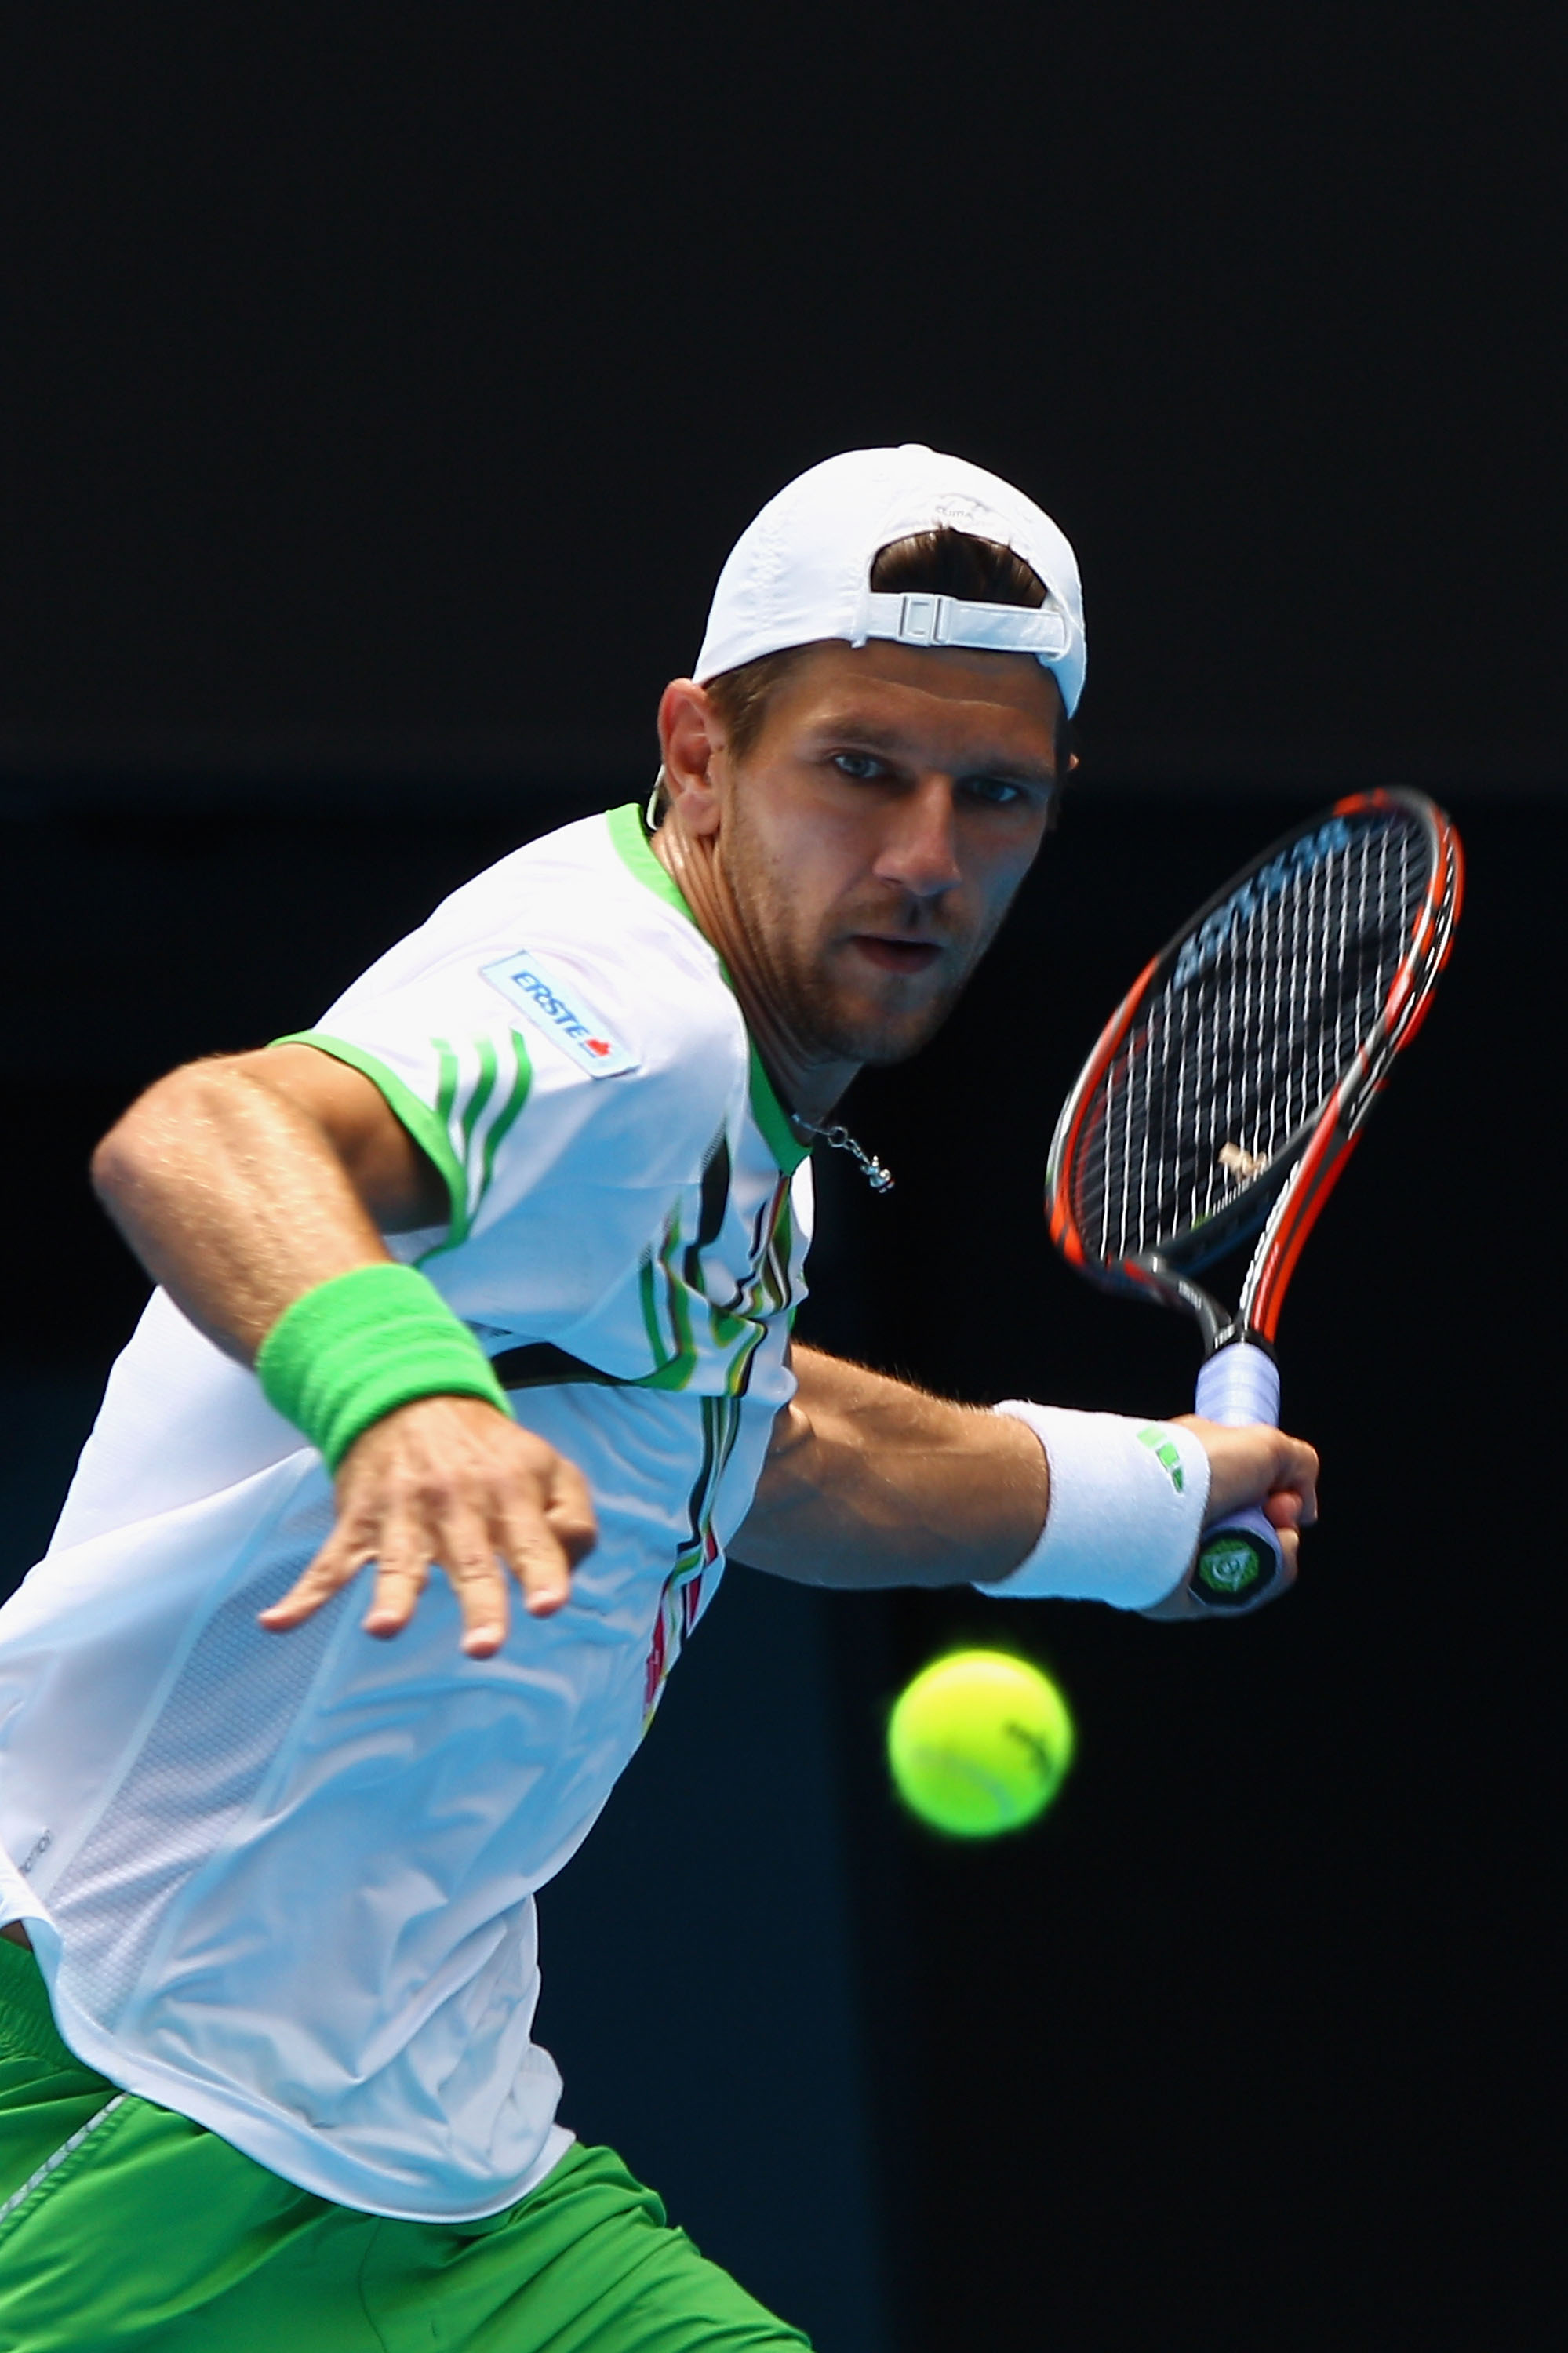 MELBOURNE, AUSTRALIA - JANUARY 24:  Jurgen Melzer of Austria plays a backhand in his fourth round match against during day eight of the 2011 Australian Open at Melbourne Park on January 24, 2011 in Melbourne, Australia.  (Photo by Quinn Rooney/Getty Image